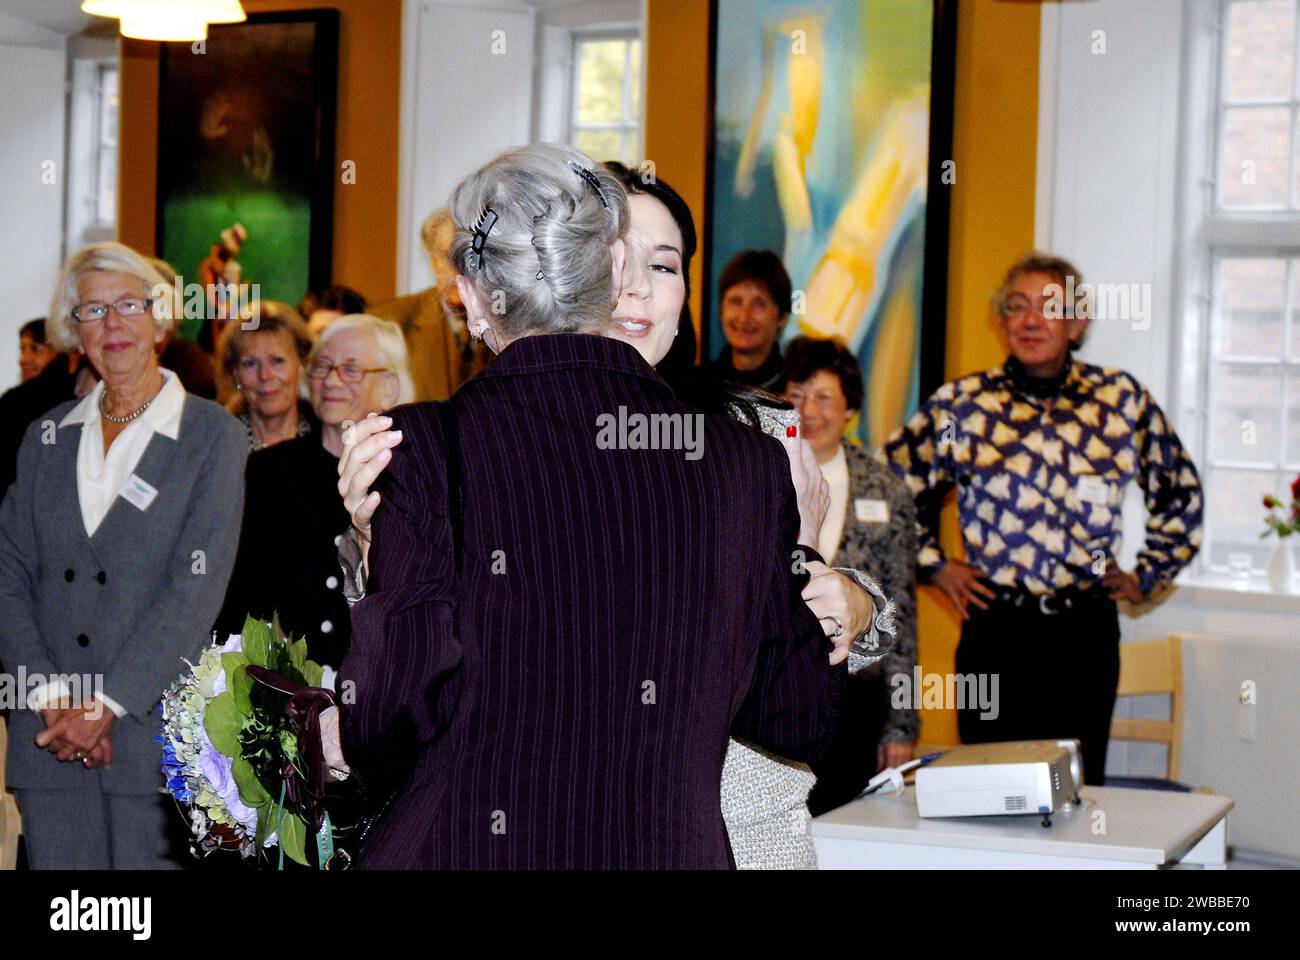 H.M.The Queen Margrethe & Crown princess Mary Donaldson together attended ICOM Costume meeting A glimpse of Danish Costume History at Vortov grundvig insitute in Copenhagen Denmark Oct.9,2006 Stock Photo